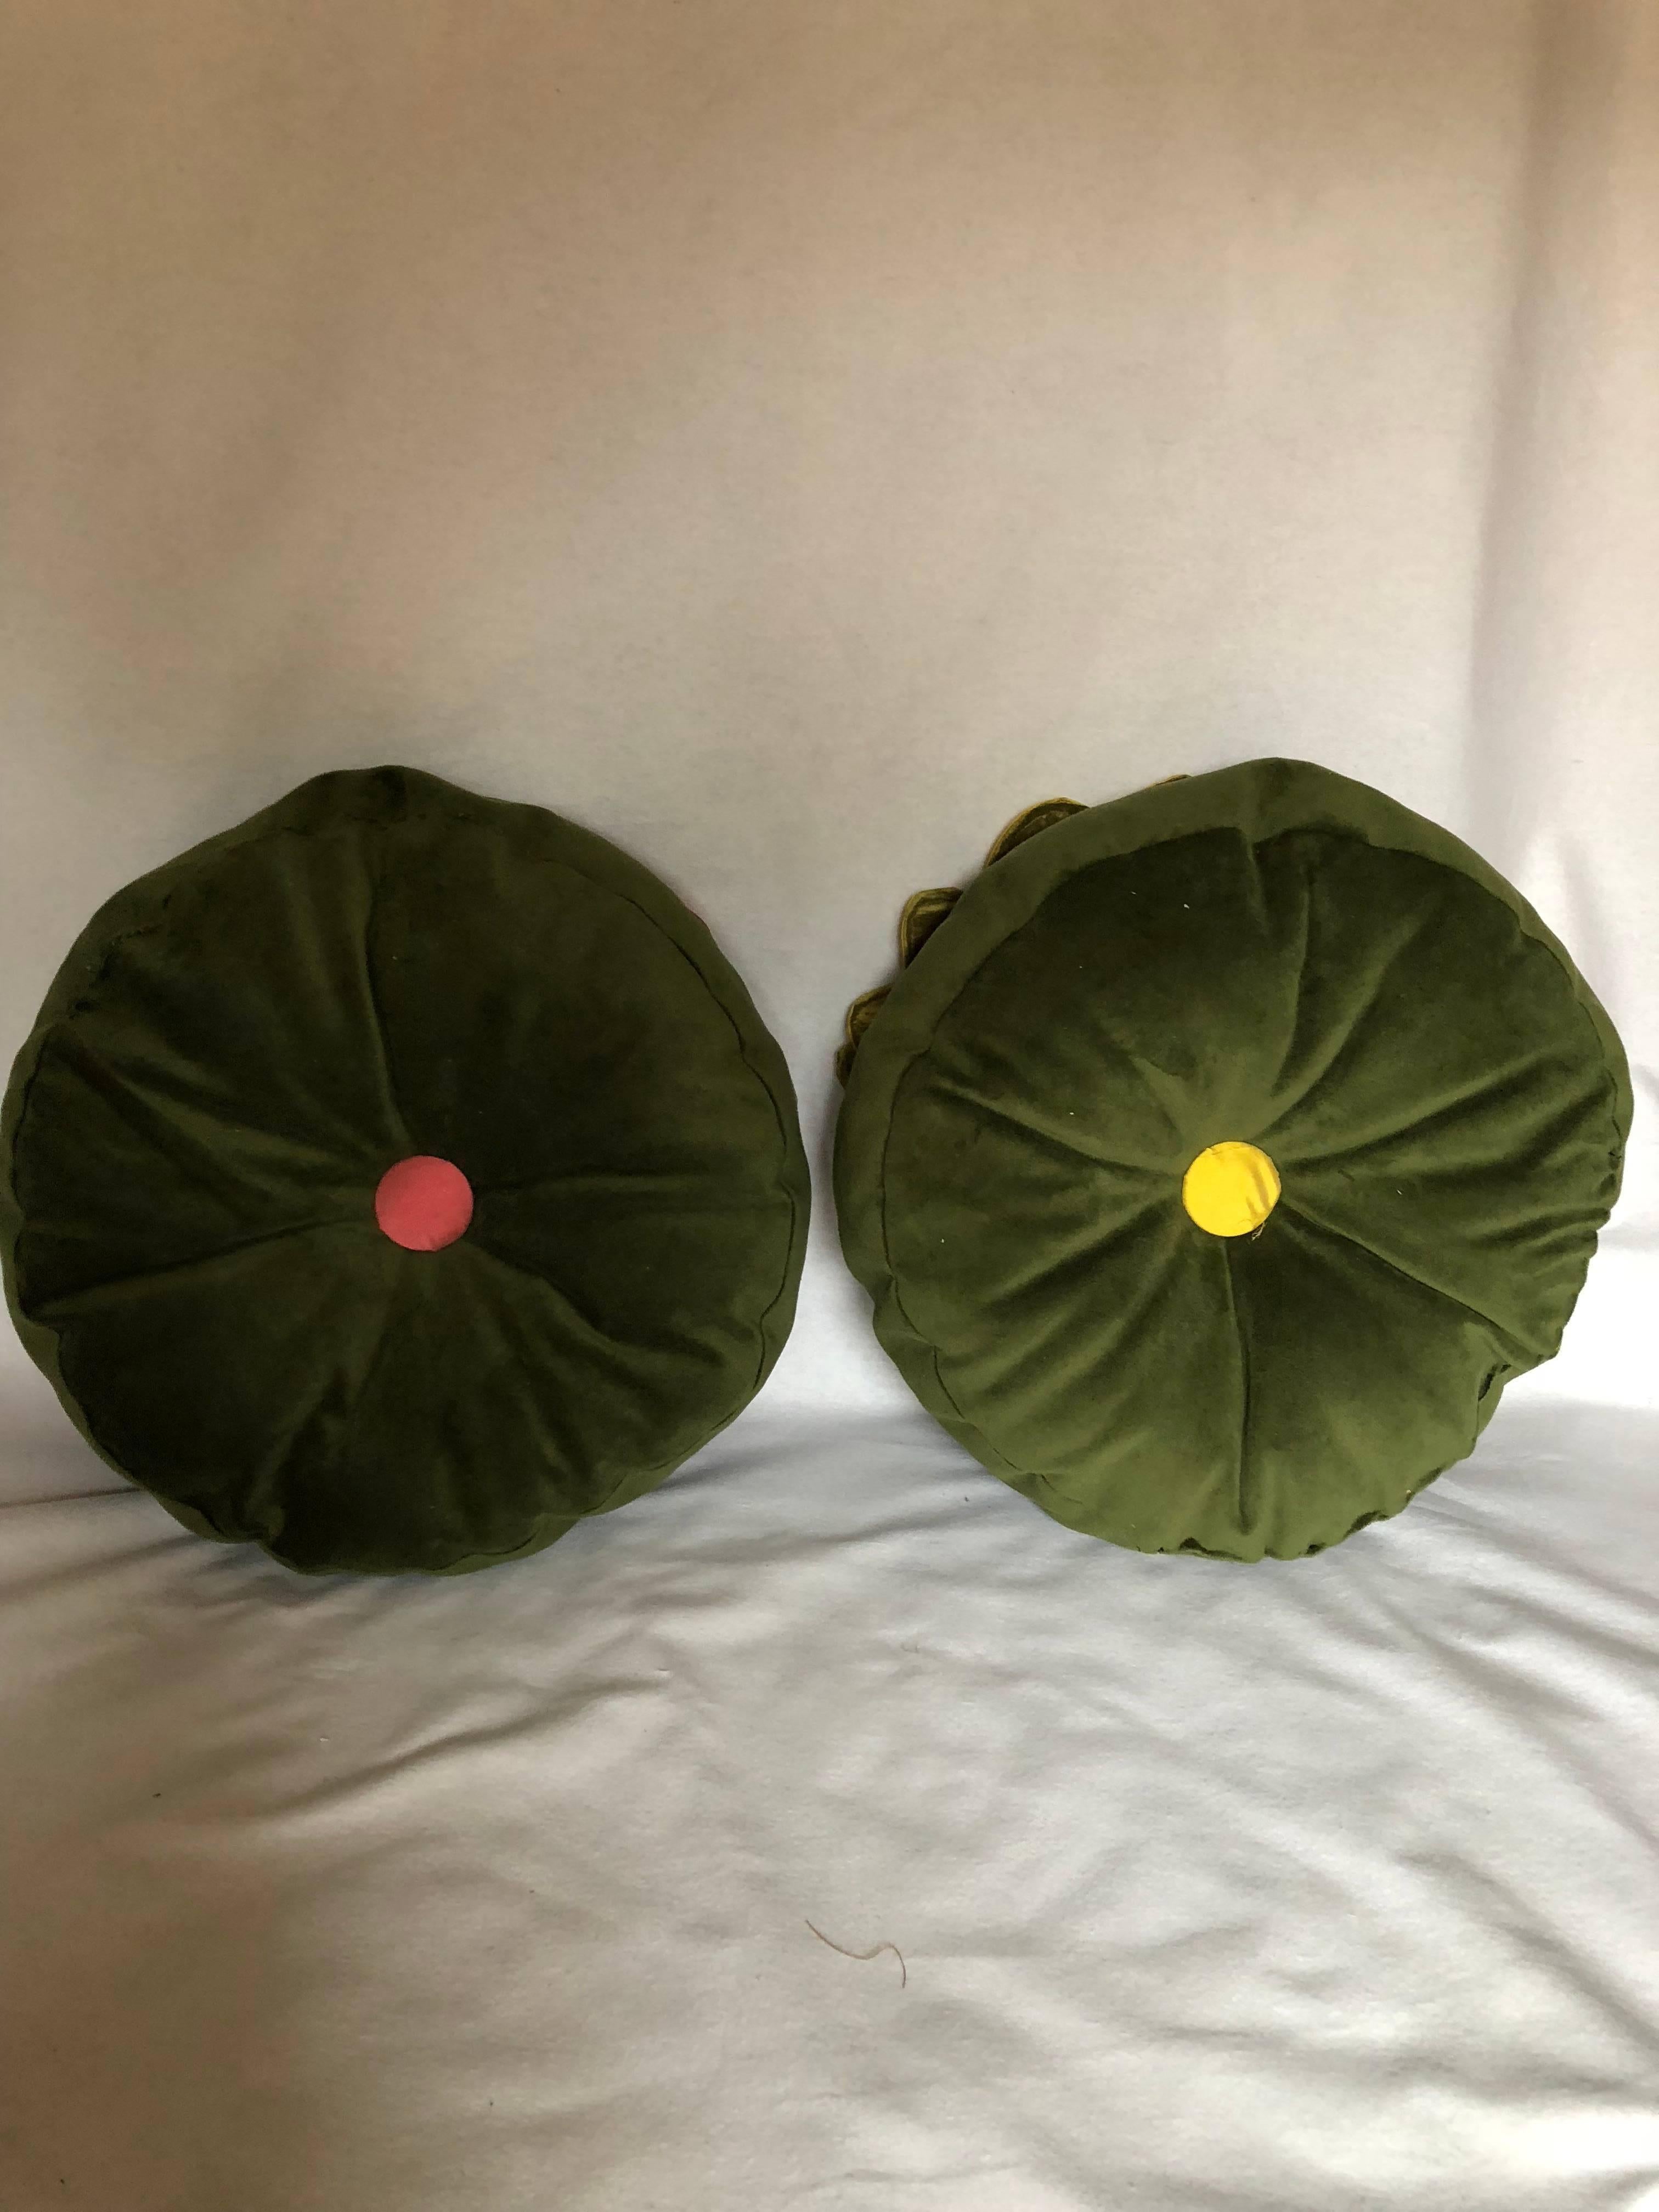 Gerber Daisy Throw Pillow, Unusual Original Design, Signed Limited Ed. Pillow In Excellent Condition For Sale In Harrisburg, PA